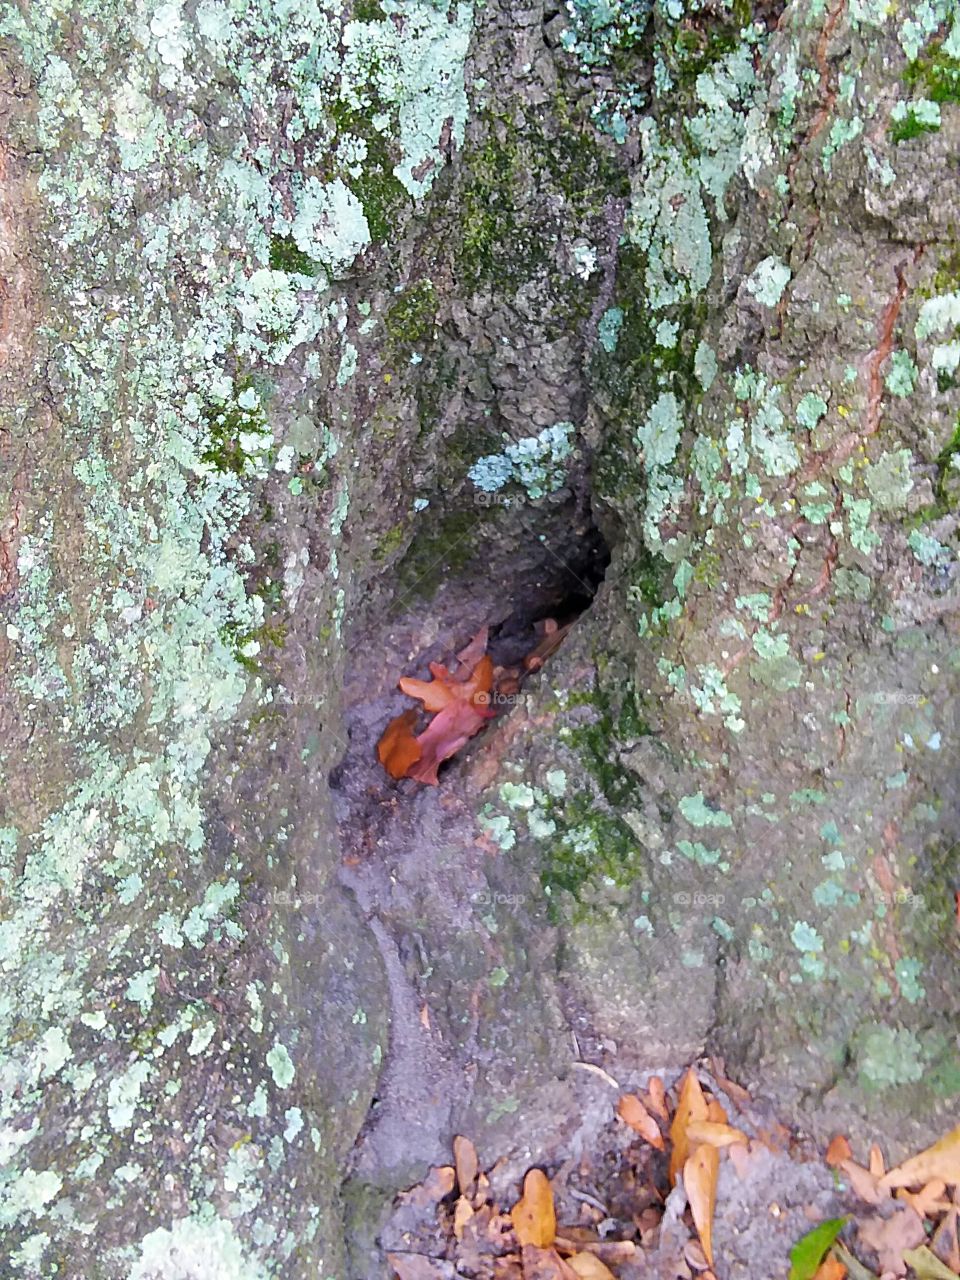 small opening in tree trunk